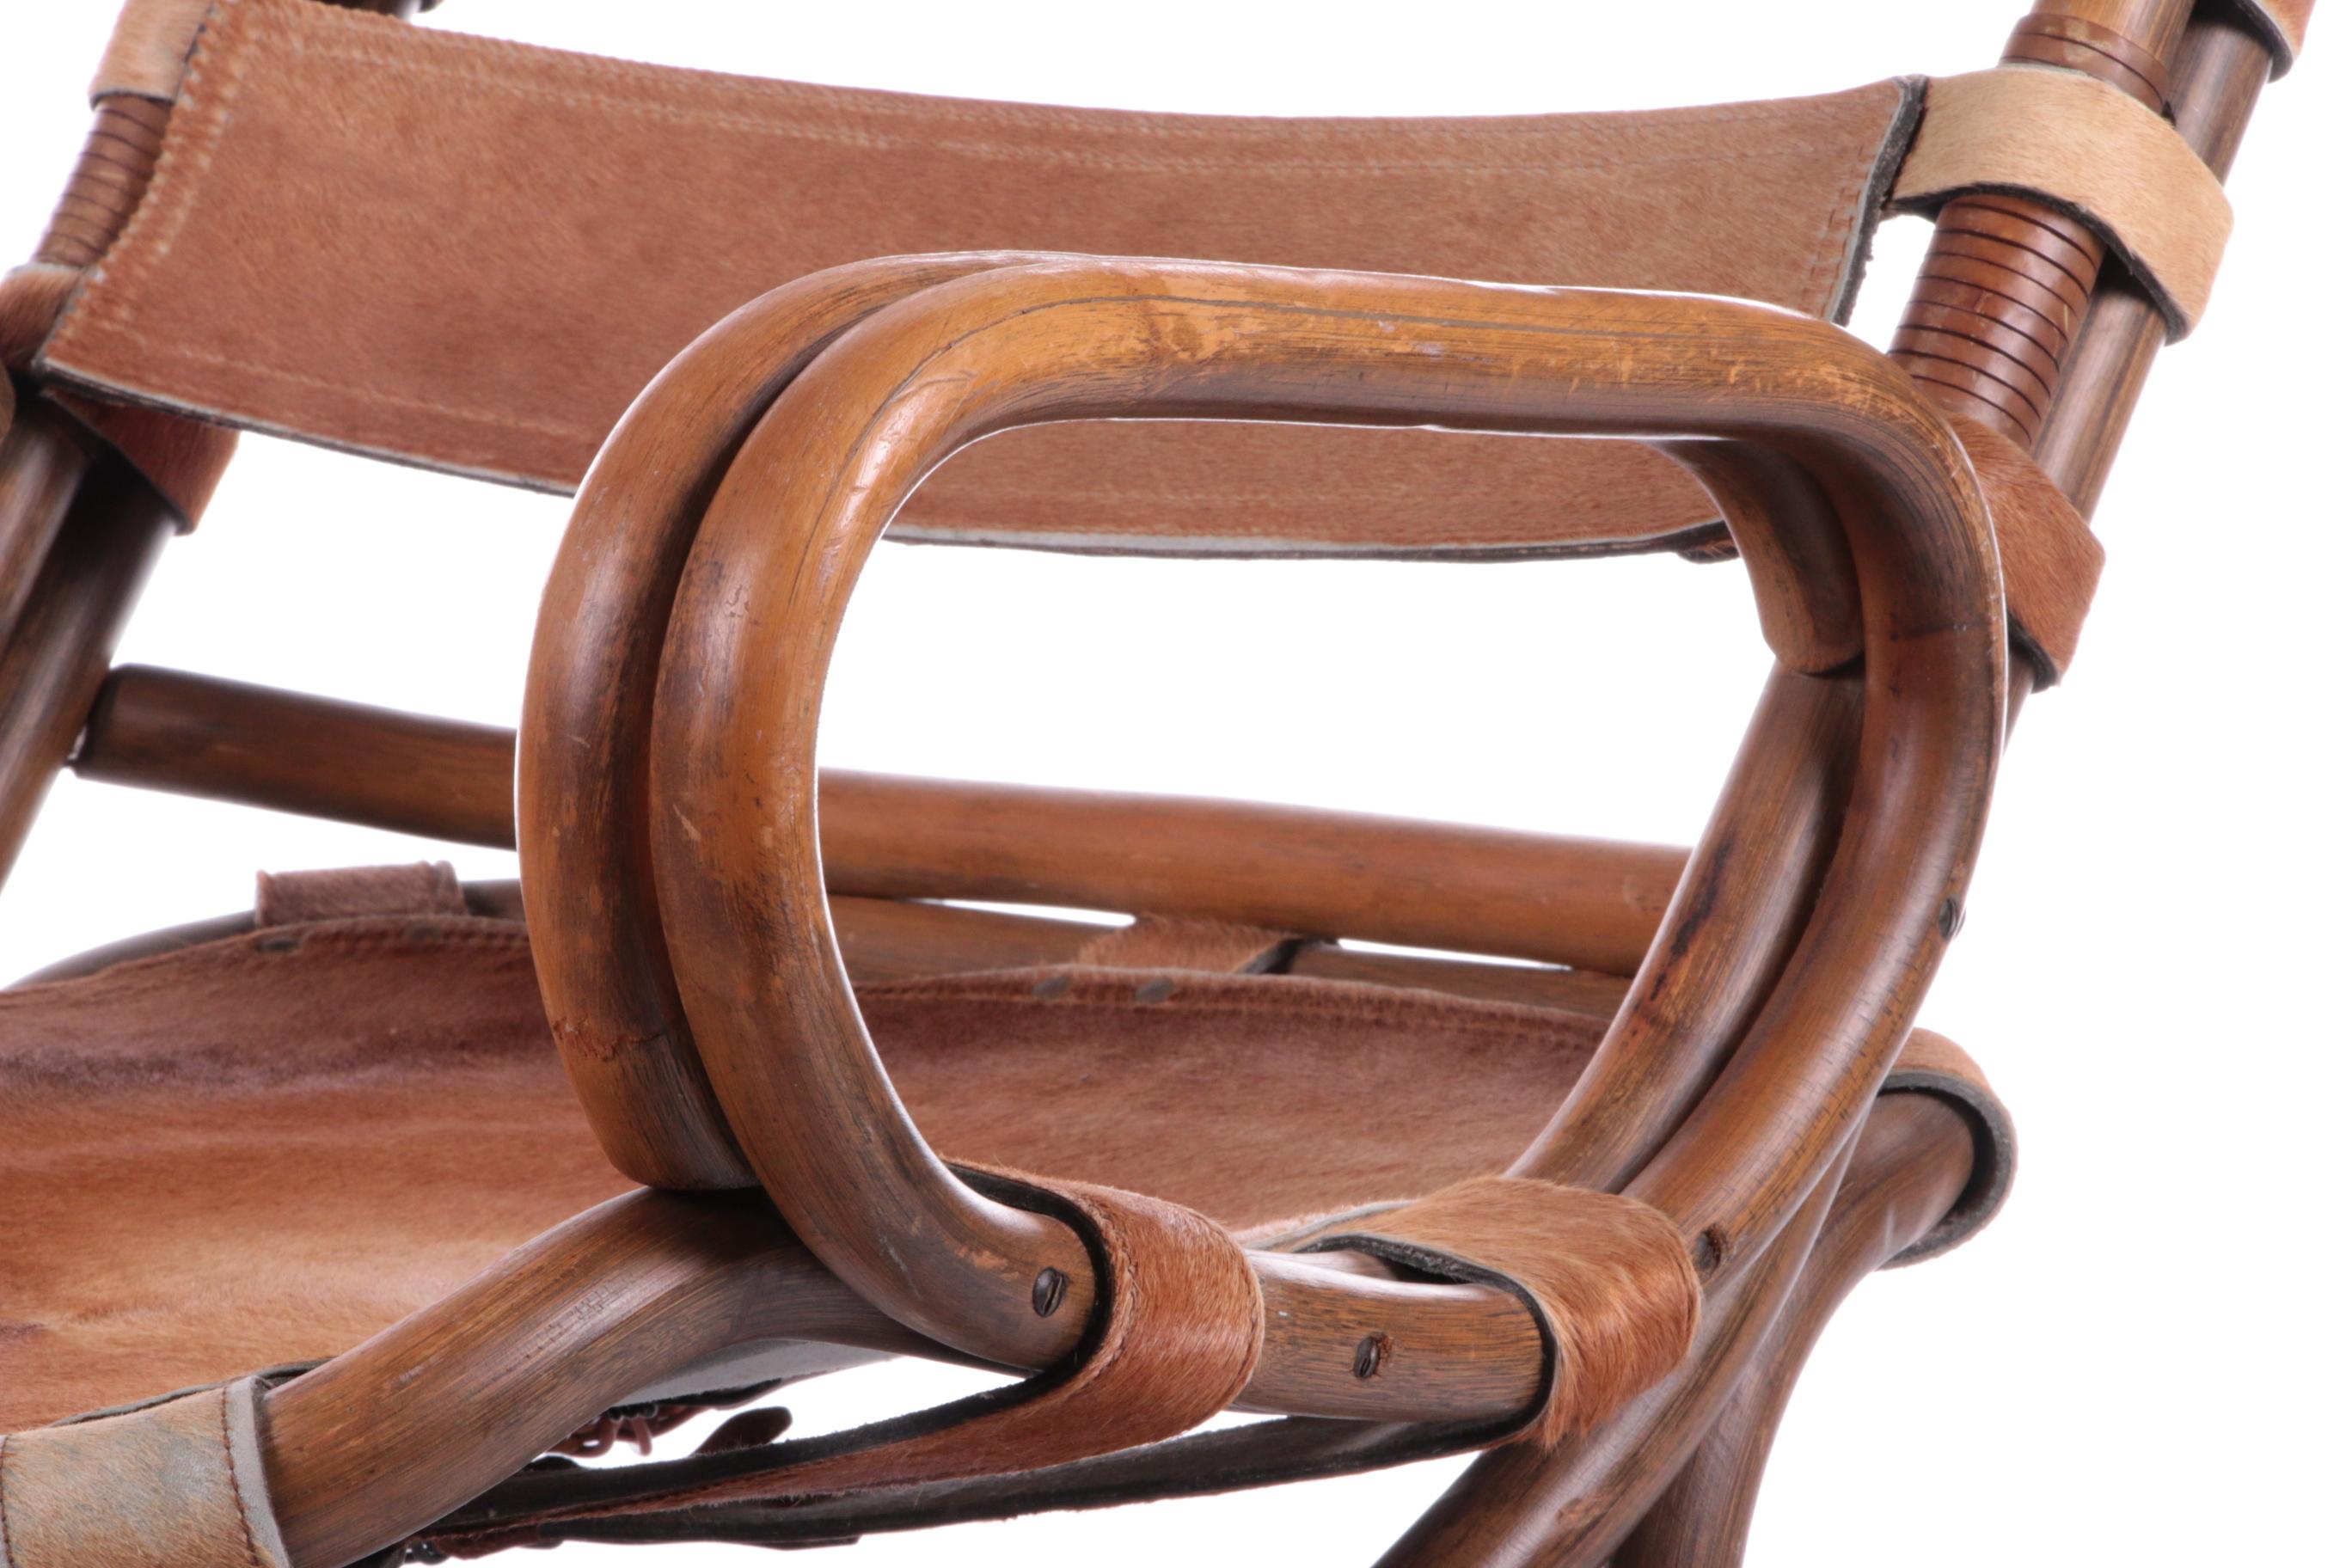 Tito Agnoli Relax Chair Made of Bamboo and Leather, 1960 For Sale 1